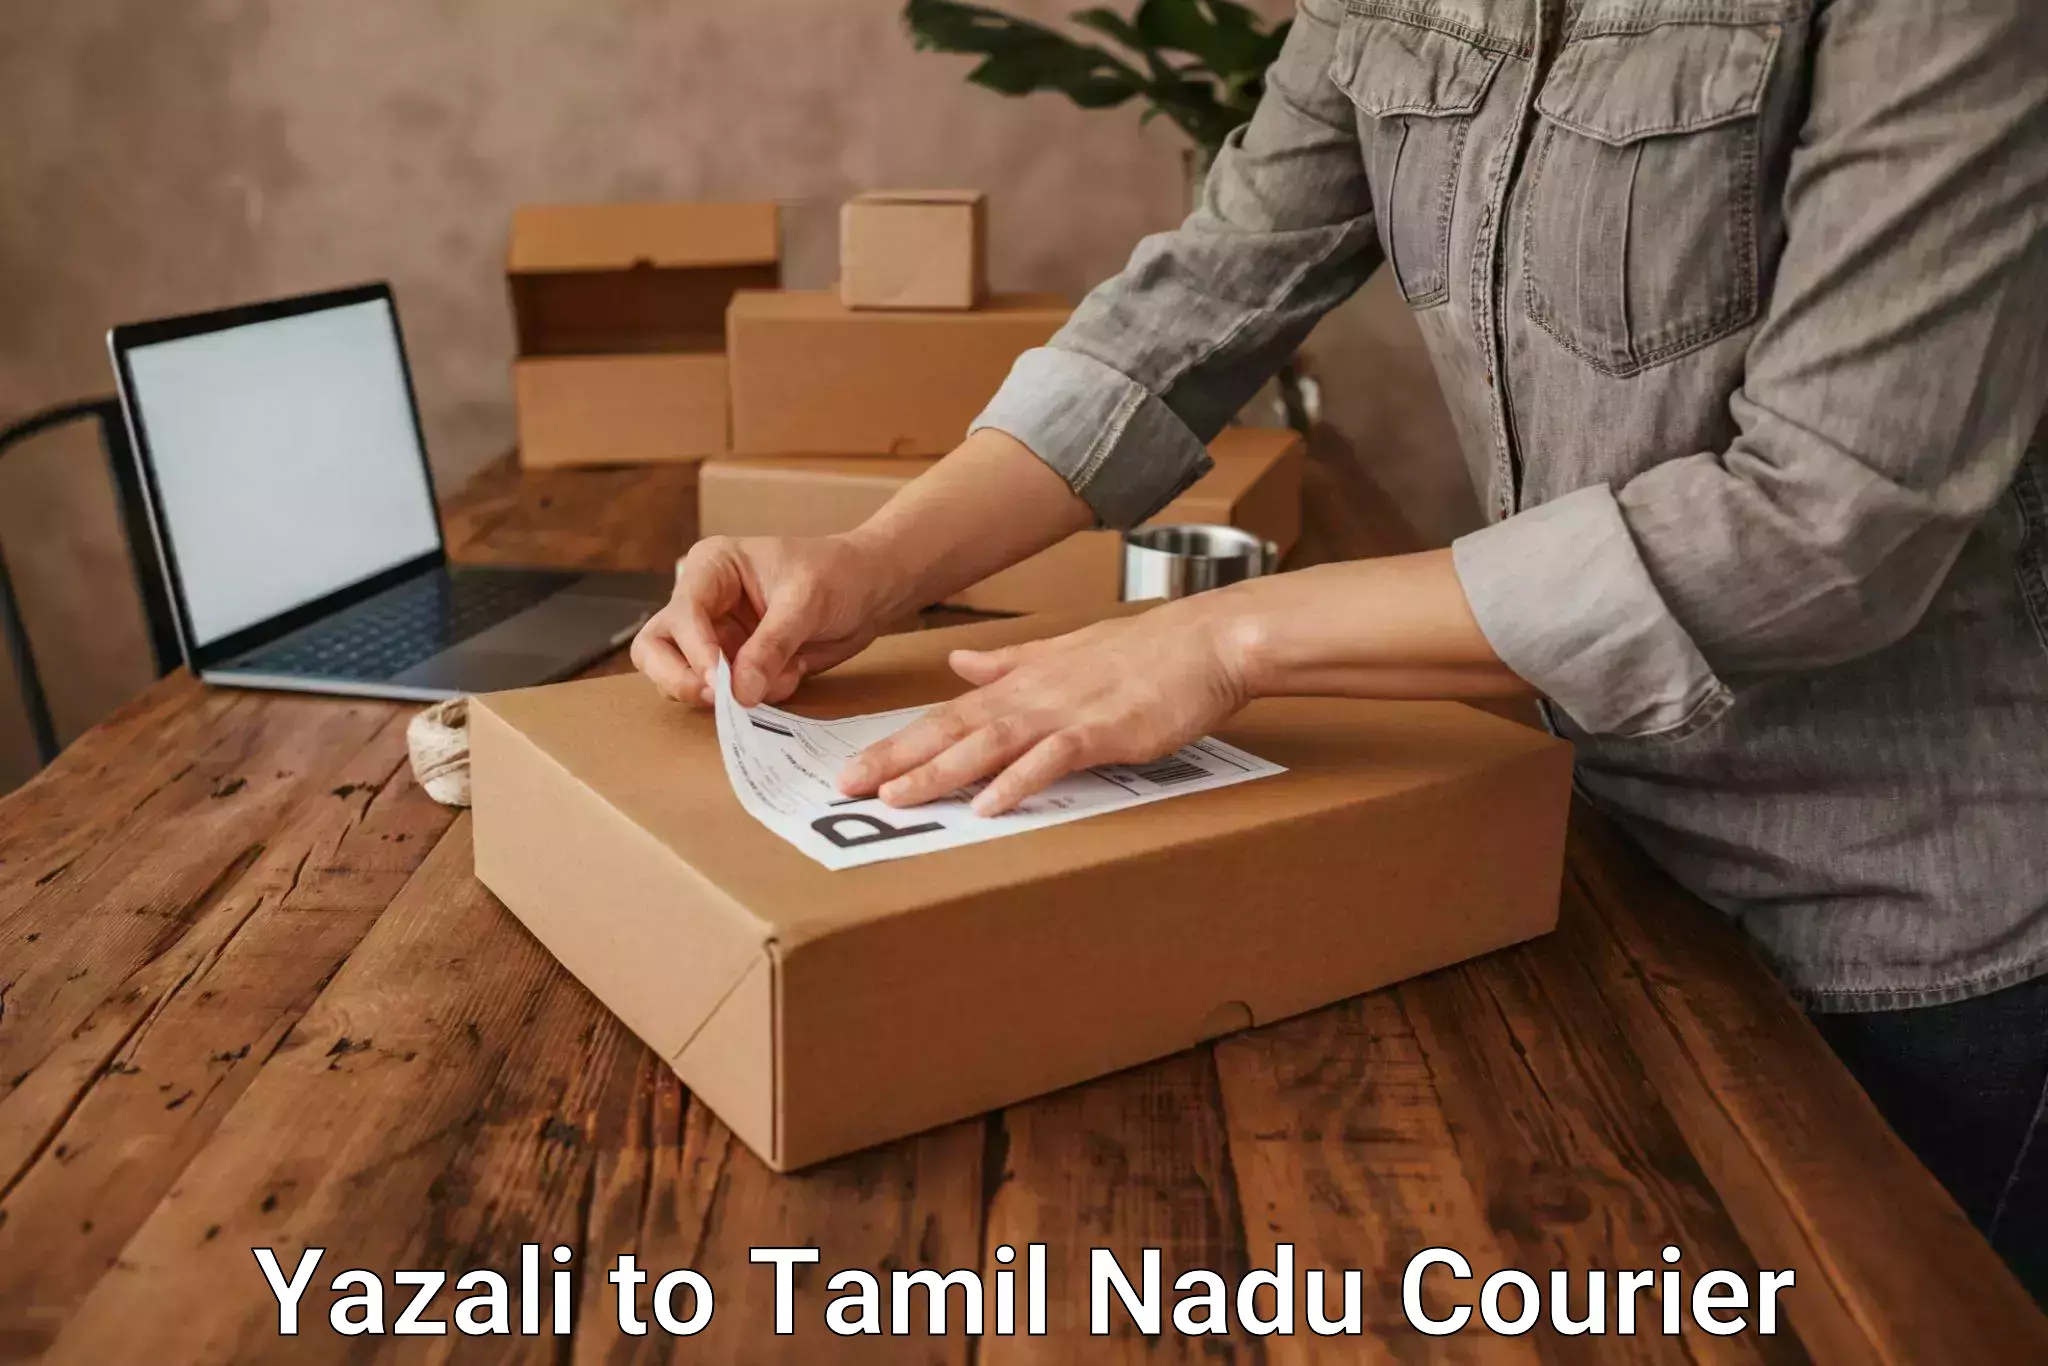 Courier membership Yazali to Shanmugha Arts Science Technology and Research Academy Thanjavur